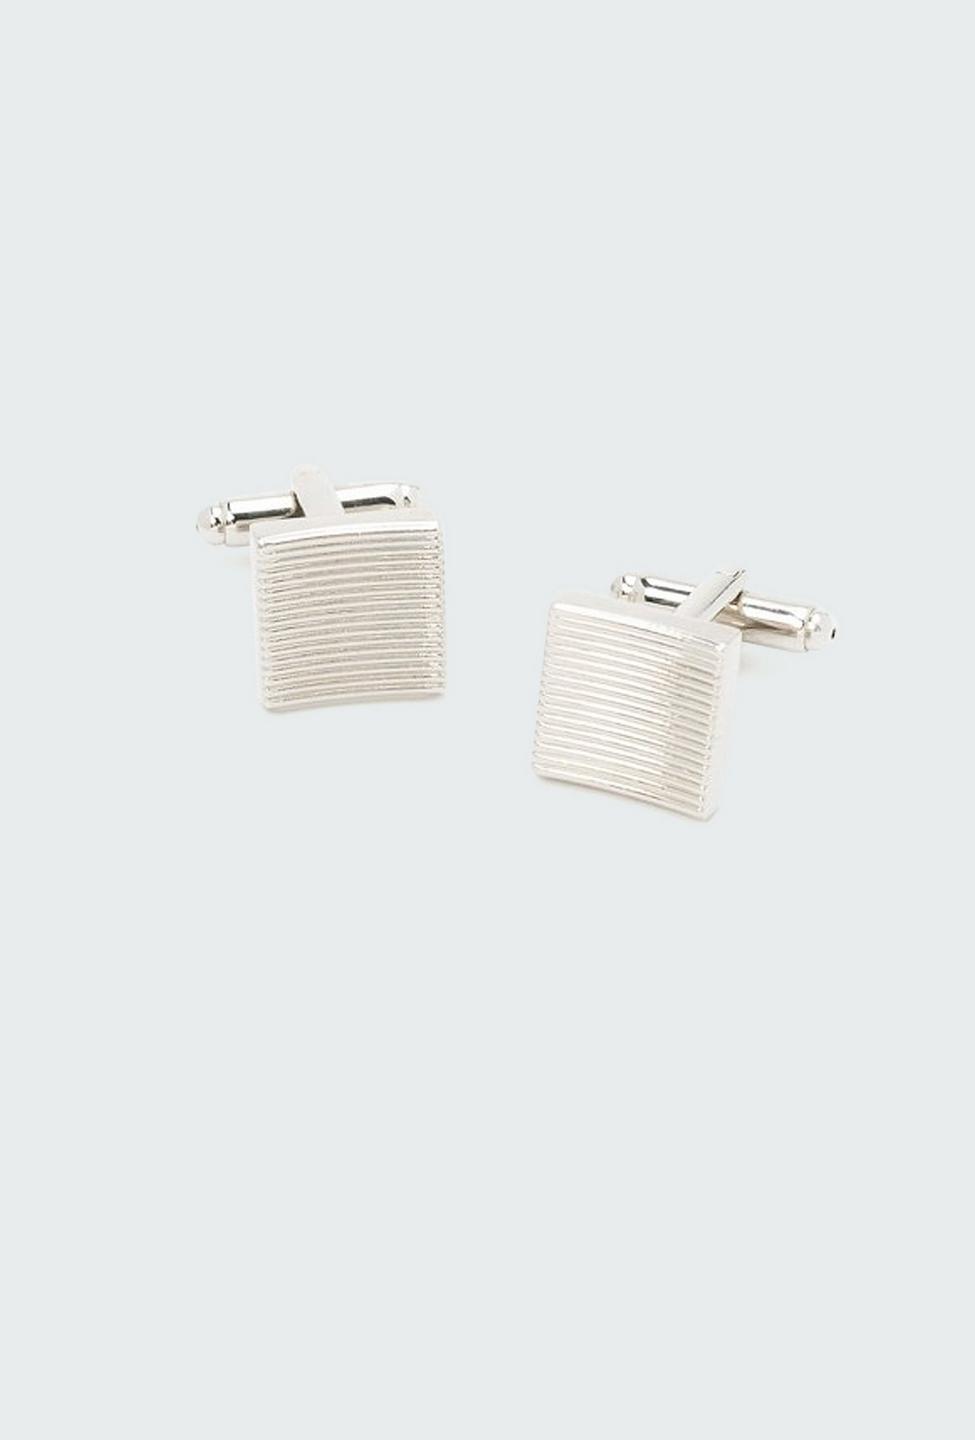 Silver cuff links - Solid Design from Premium Indochino Collection